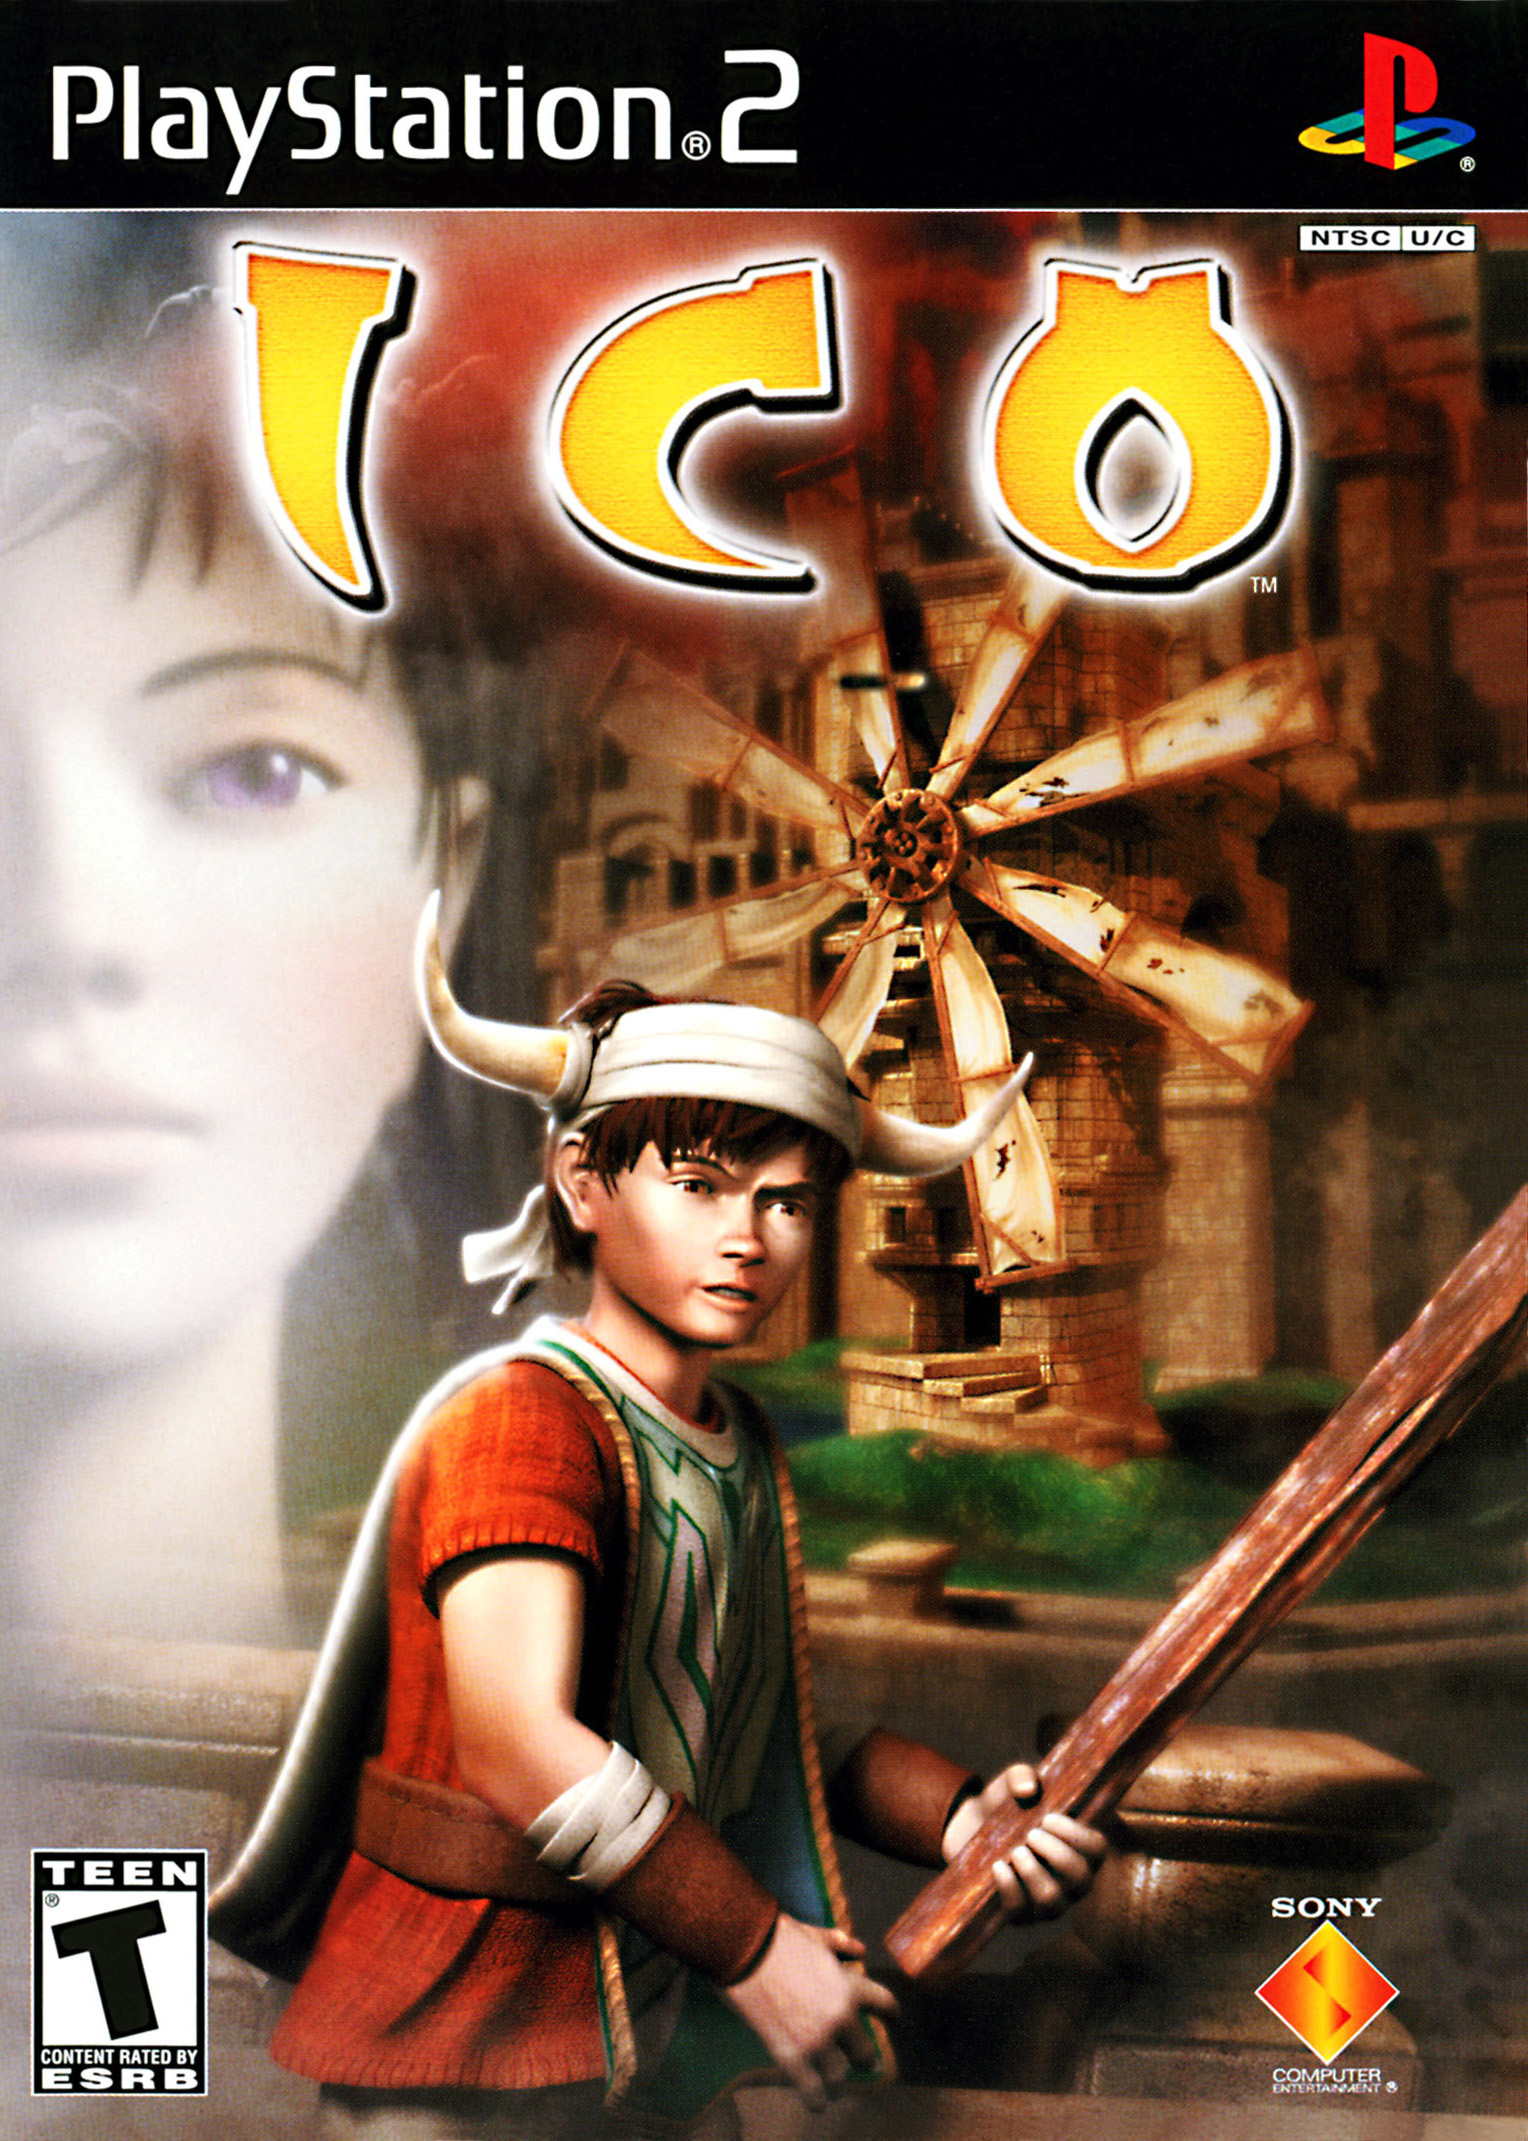 http://vignette2.wikia.nocookie.net/t__/images/8/85/ICO_North_American_Cover.jpg/revision/latest?cb=20130712211013&path-prefix=teamico